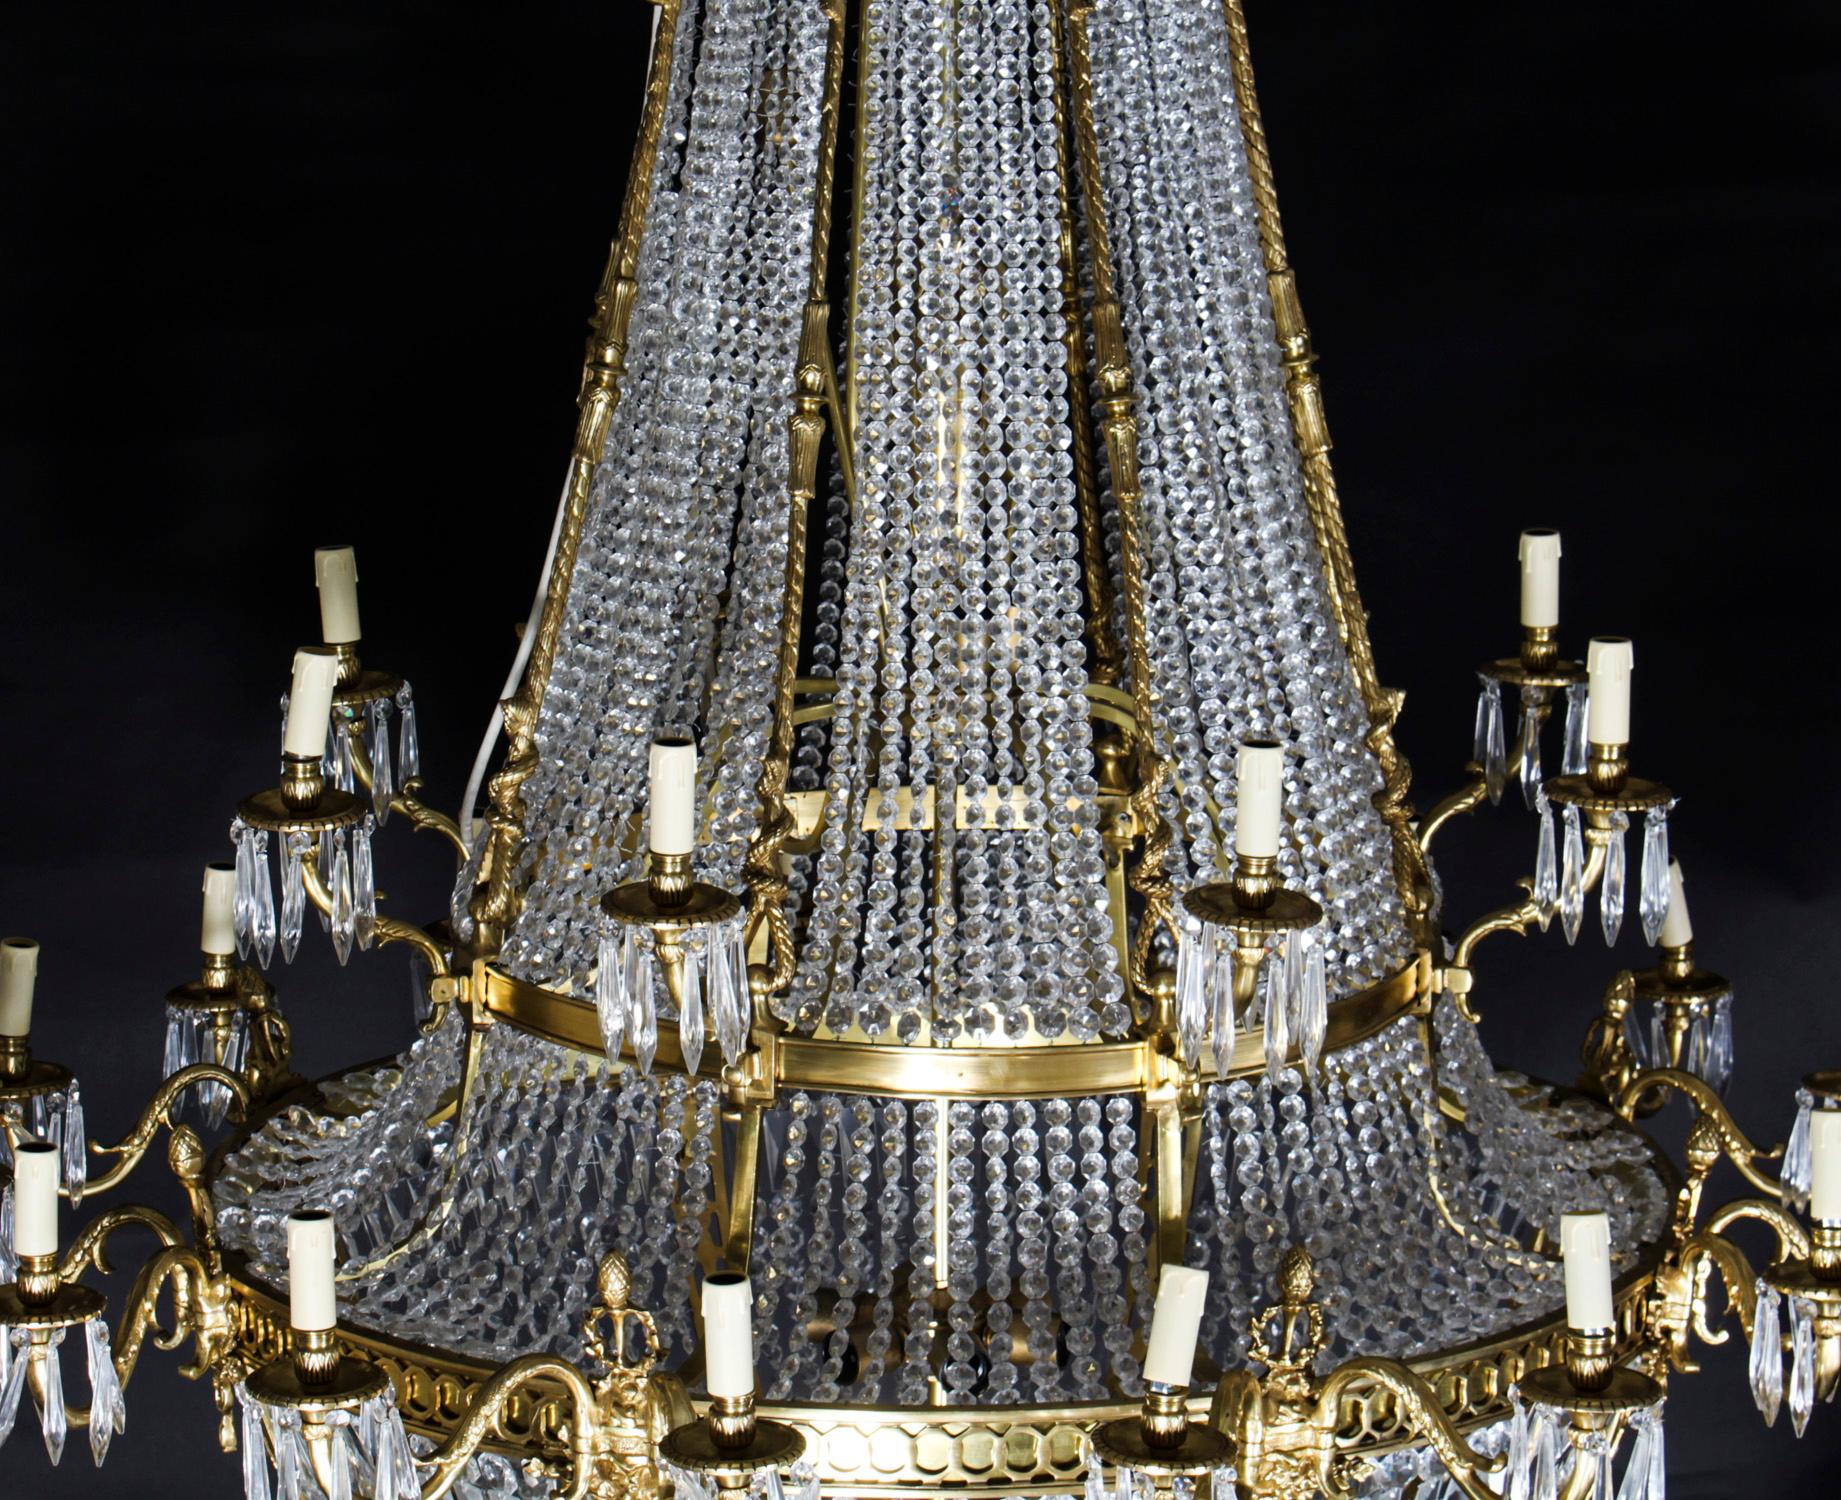 This is a beautiful Louis Revival 36 light ballroom cut crystal and bronze tent chandelier, circa 1920 in date.

The cut crystal tent and bag shaped chandelier features a curved top with raised foliate leaves over chains of crystals in a large